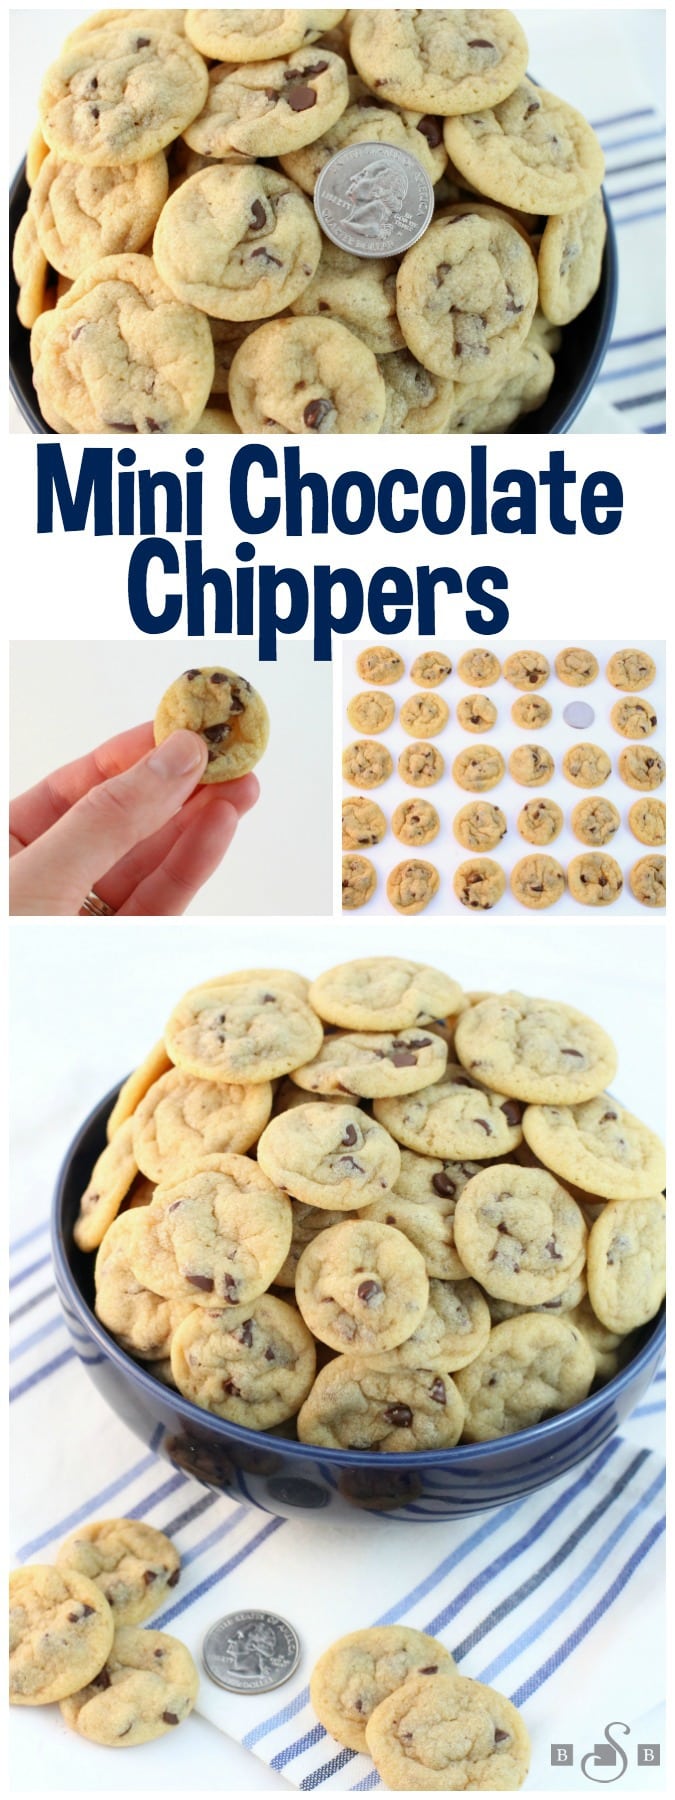 Mini Chocolate Chip Cookies are teeny tiny chocolate chip cookies about the size of a quarter! Soft,chewy poppable cookies that are perfect for parties.